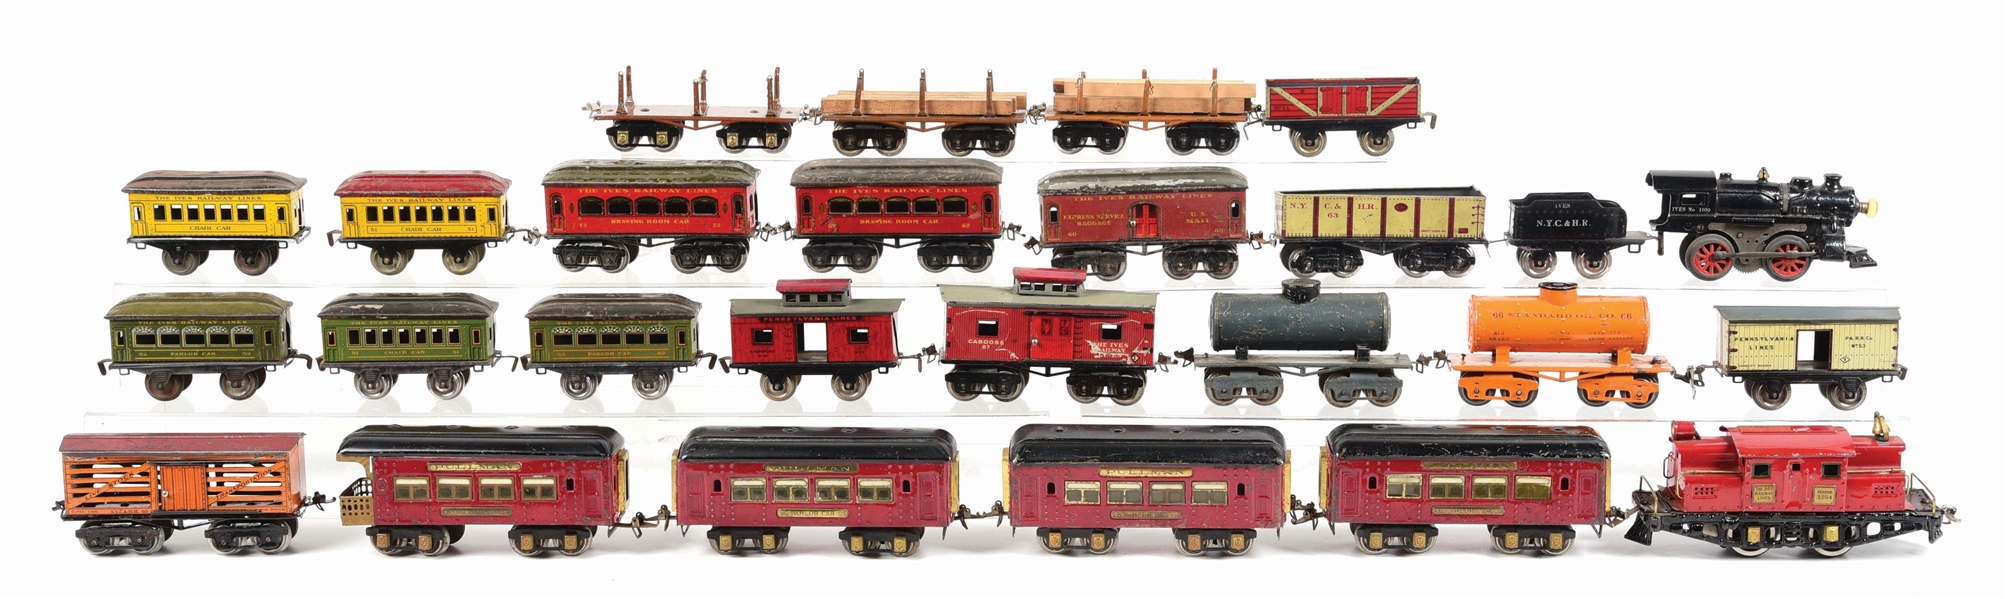 LARGE GROUPING OF IVES LOCOMOTIVES, PASSENGER CARS & FREIGHT CARS.